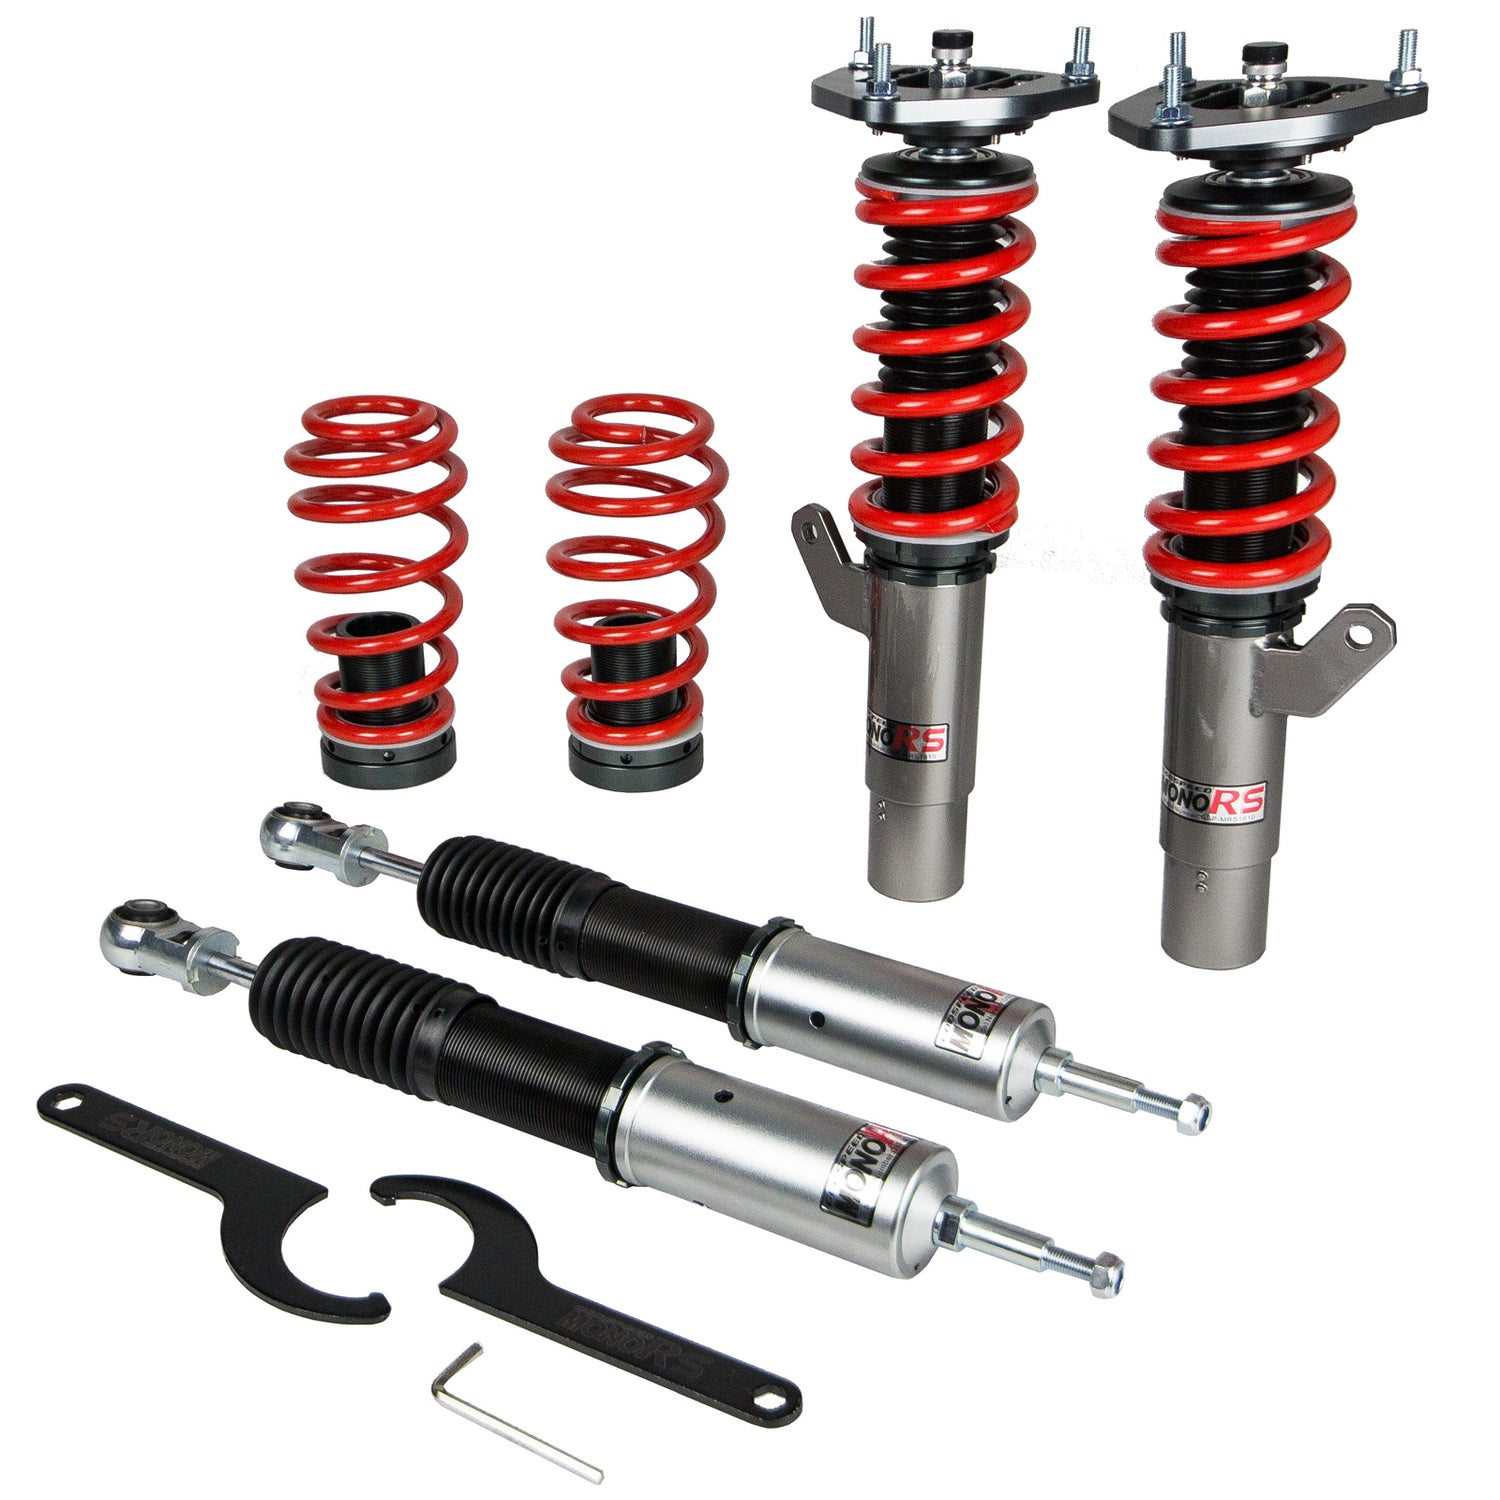 Godspeed MRS1810-C MonoRS Coilover Lowering Kit, 32 Damping Adjustment, Ride Height Adjustable